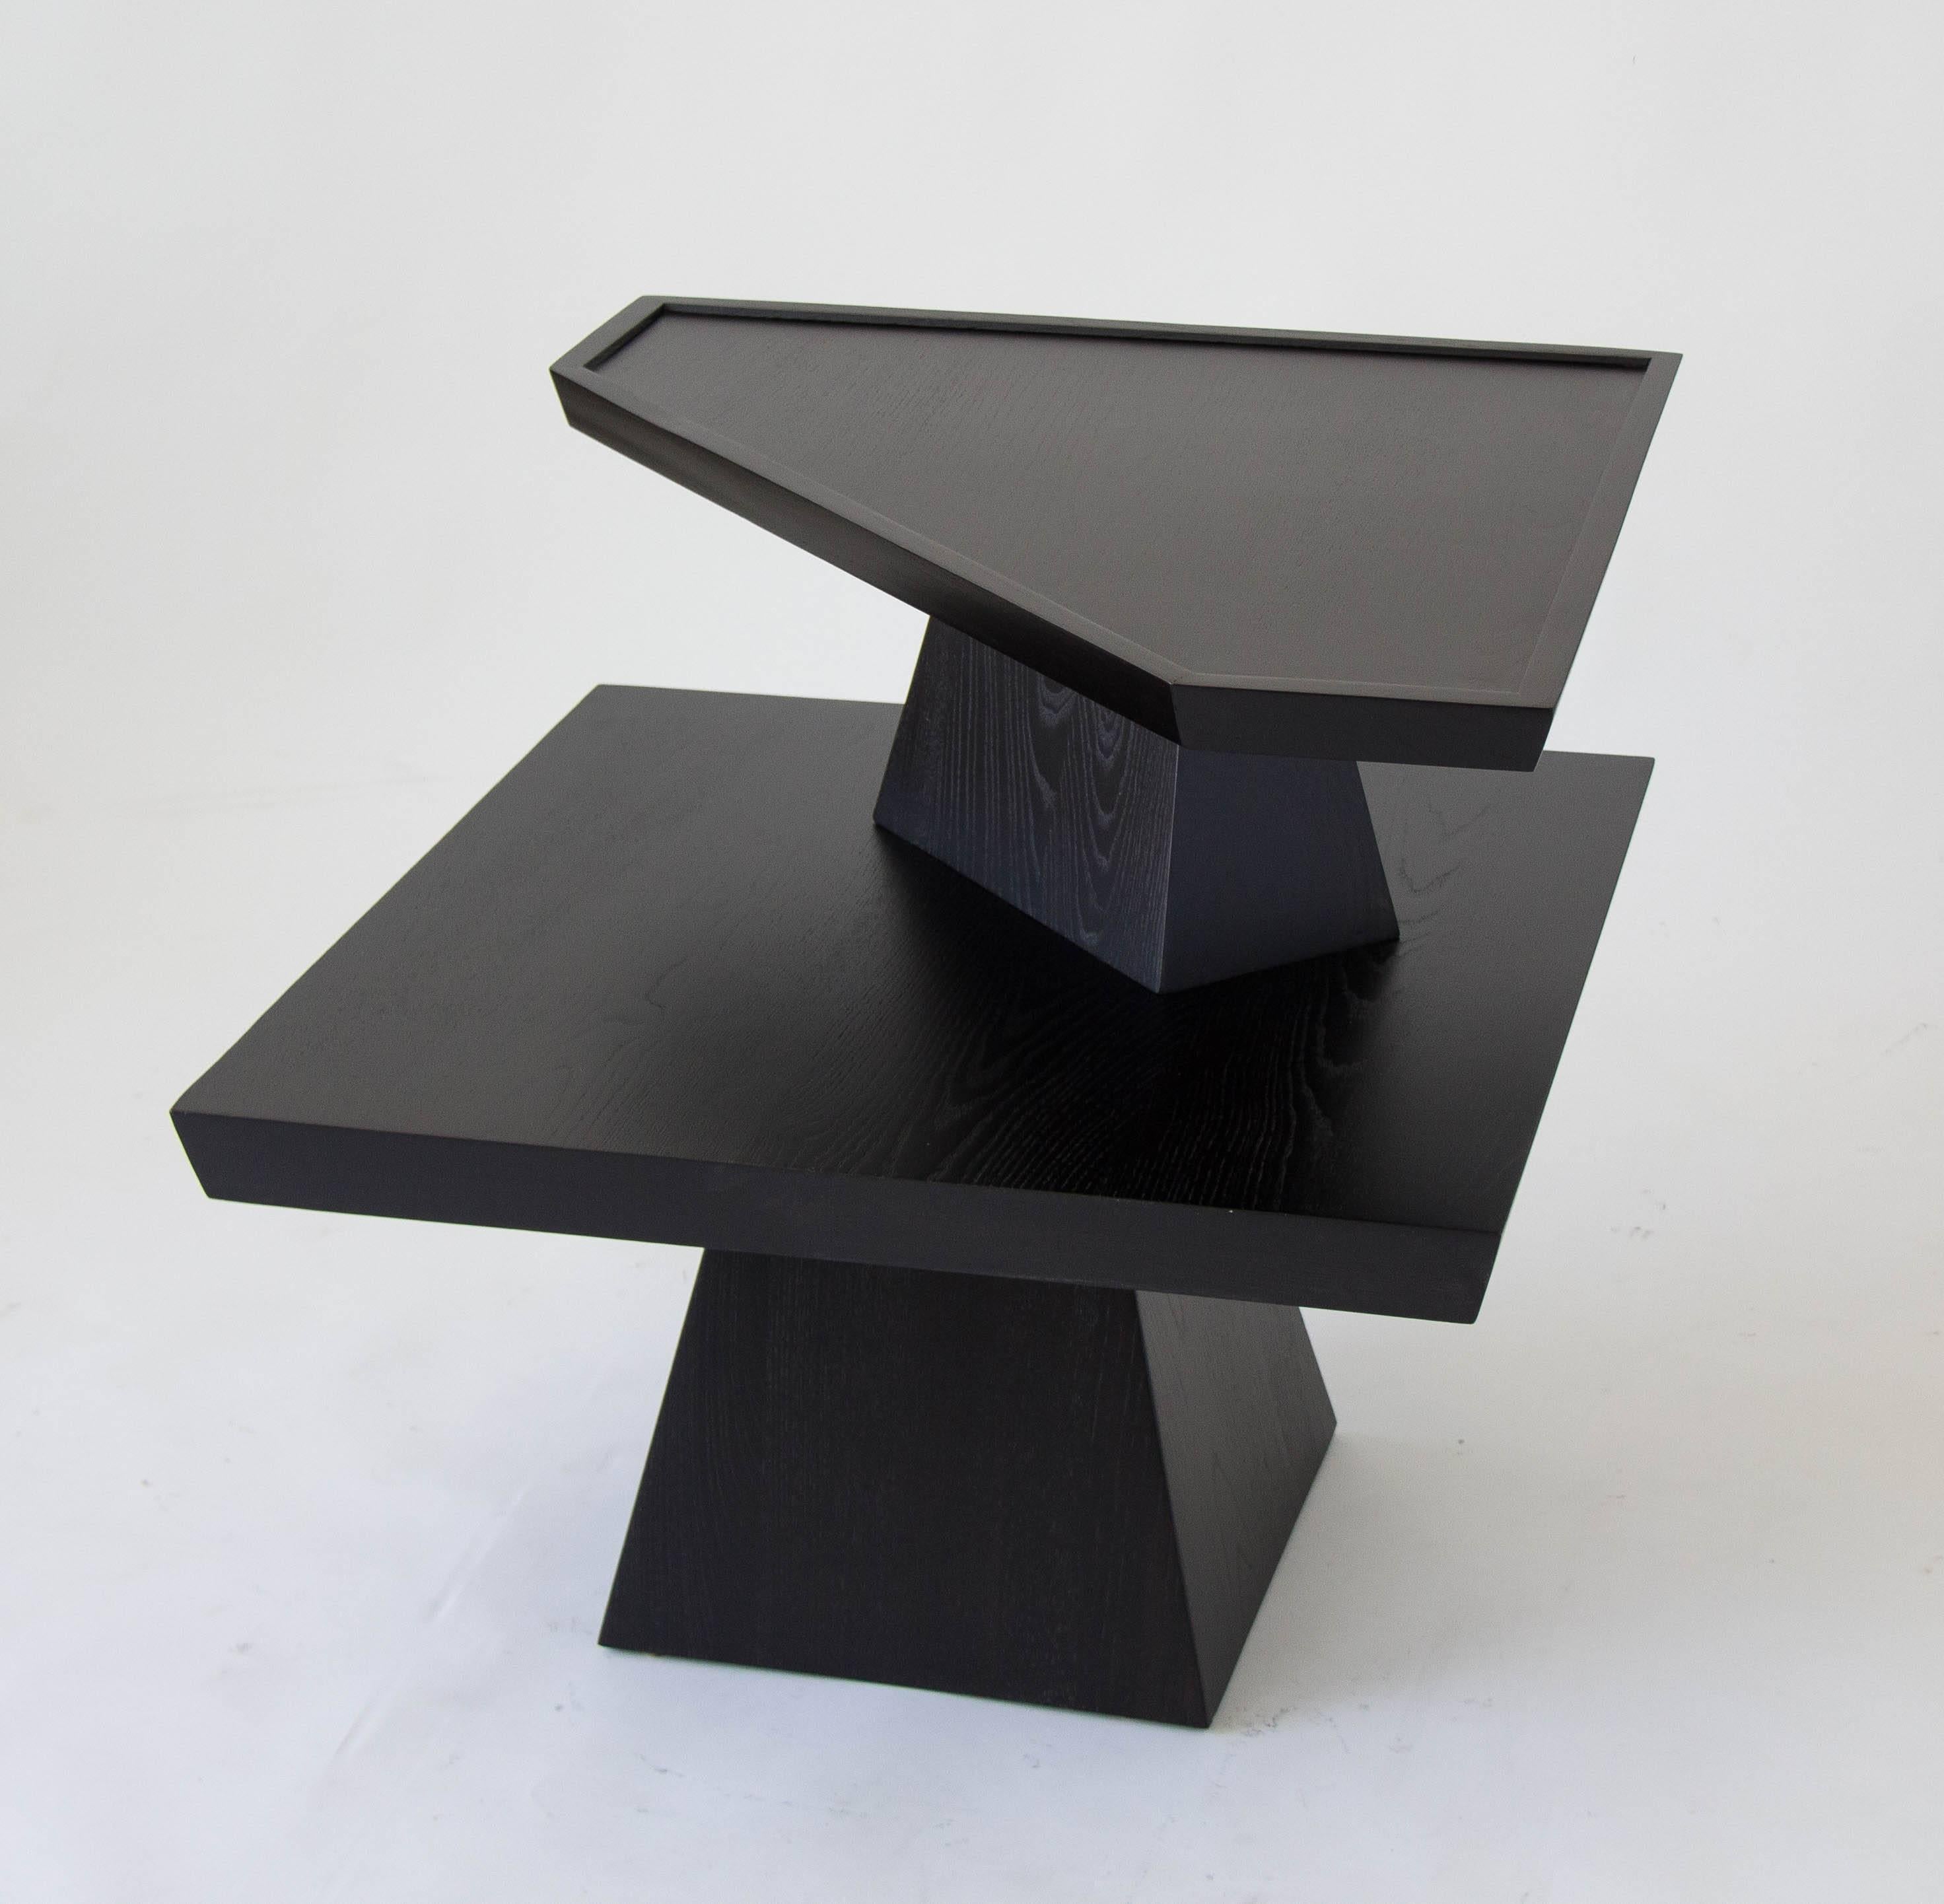 20th Century Brutalist Two-Tiered End Table with Ebonized Finish